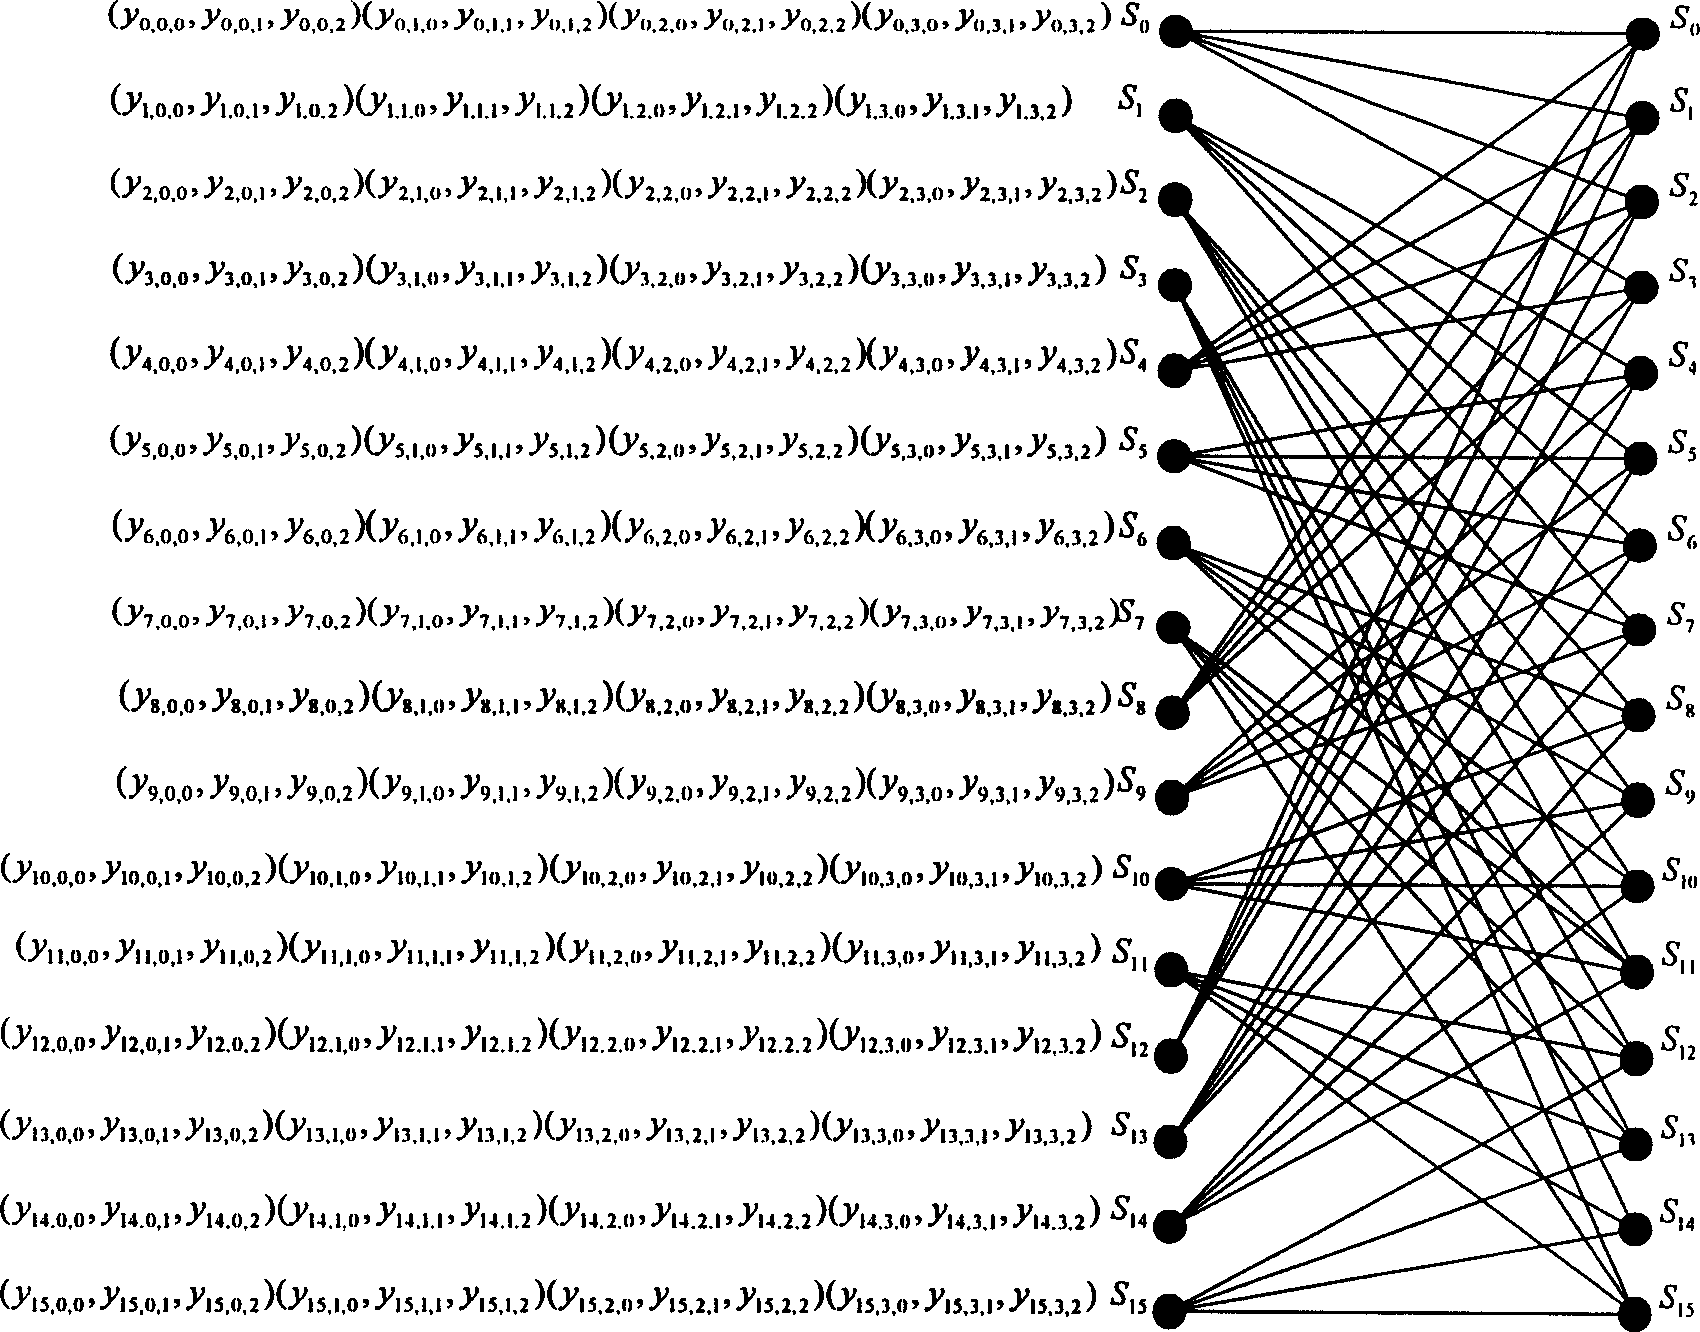 A space-time trellis code (STTC) construction method